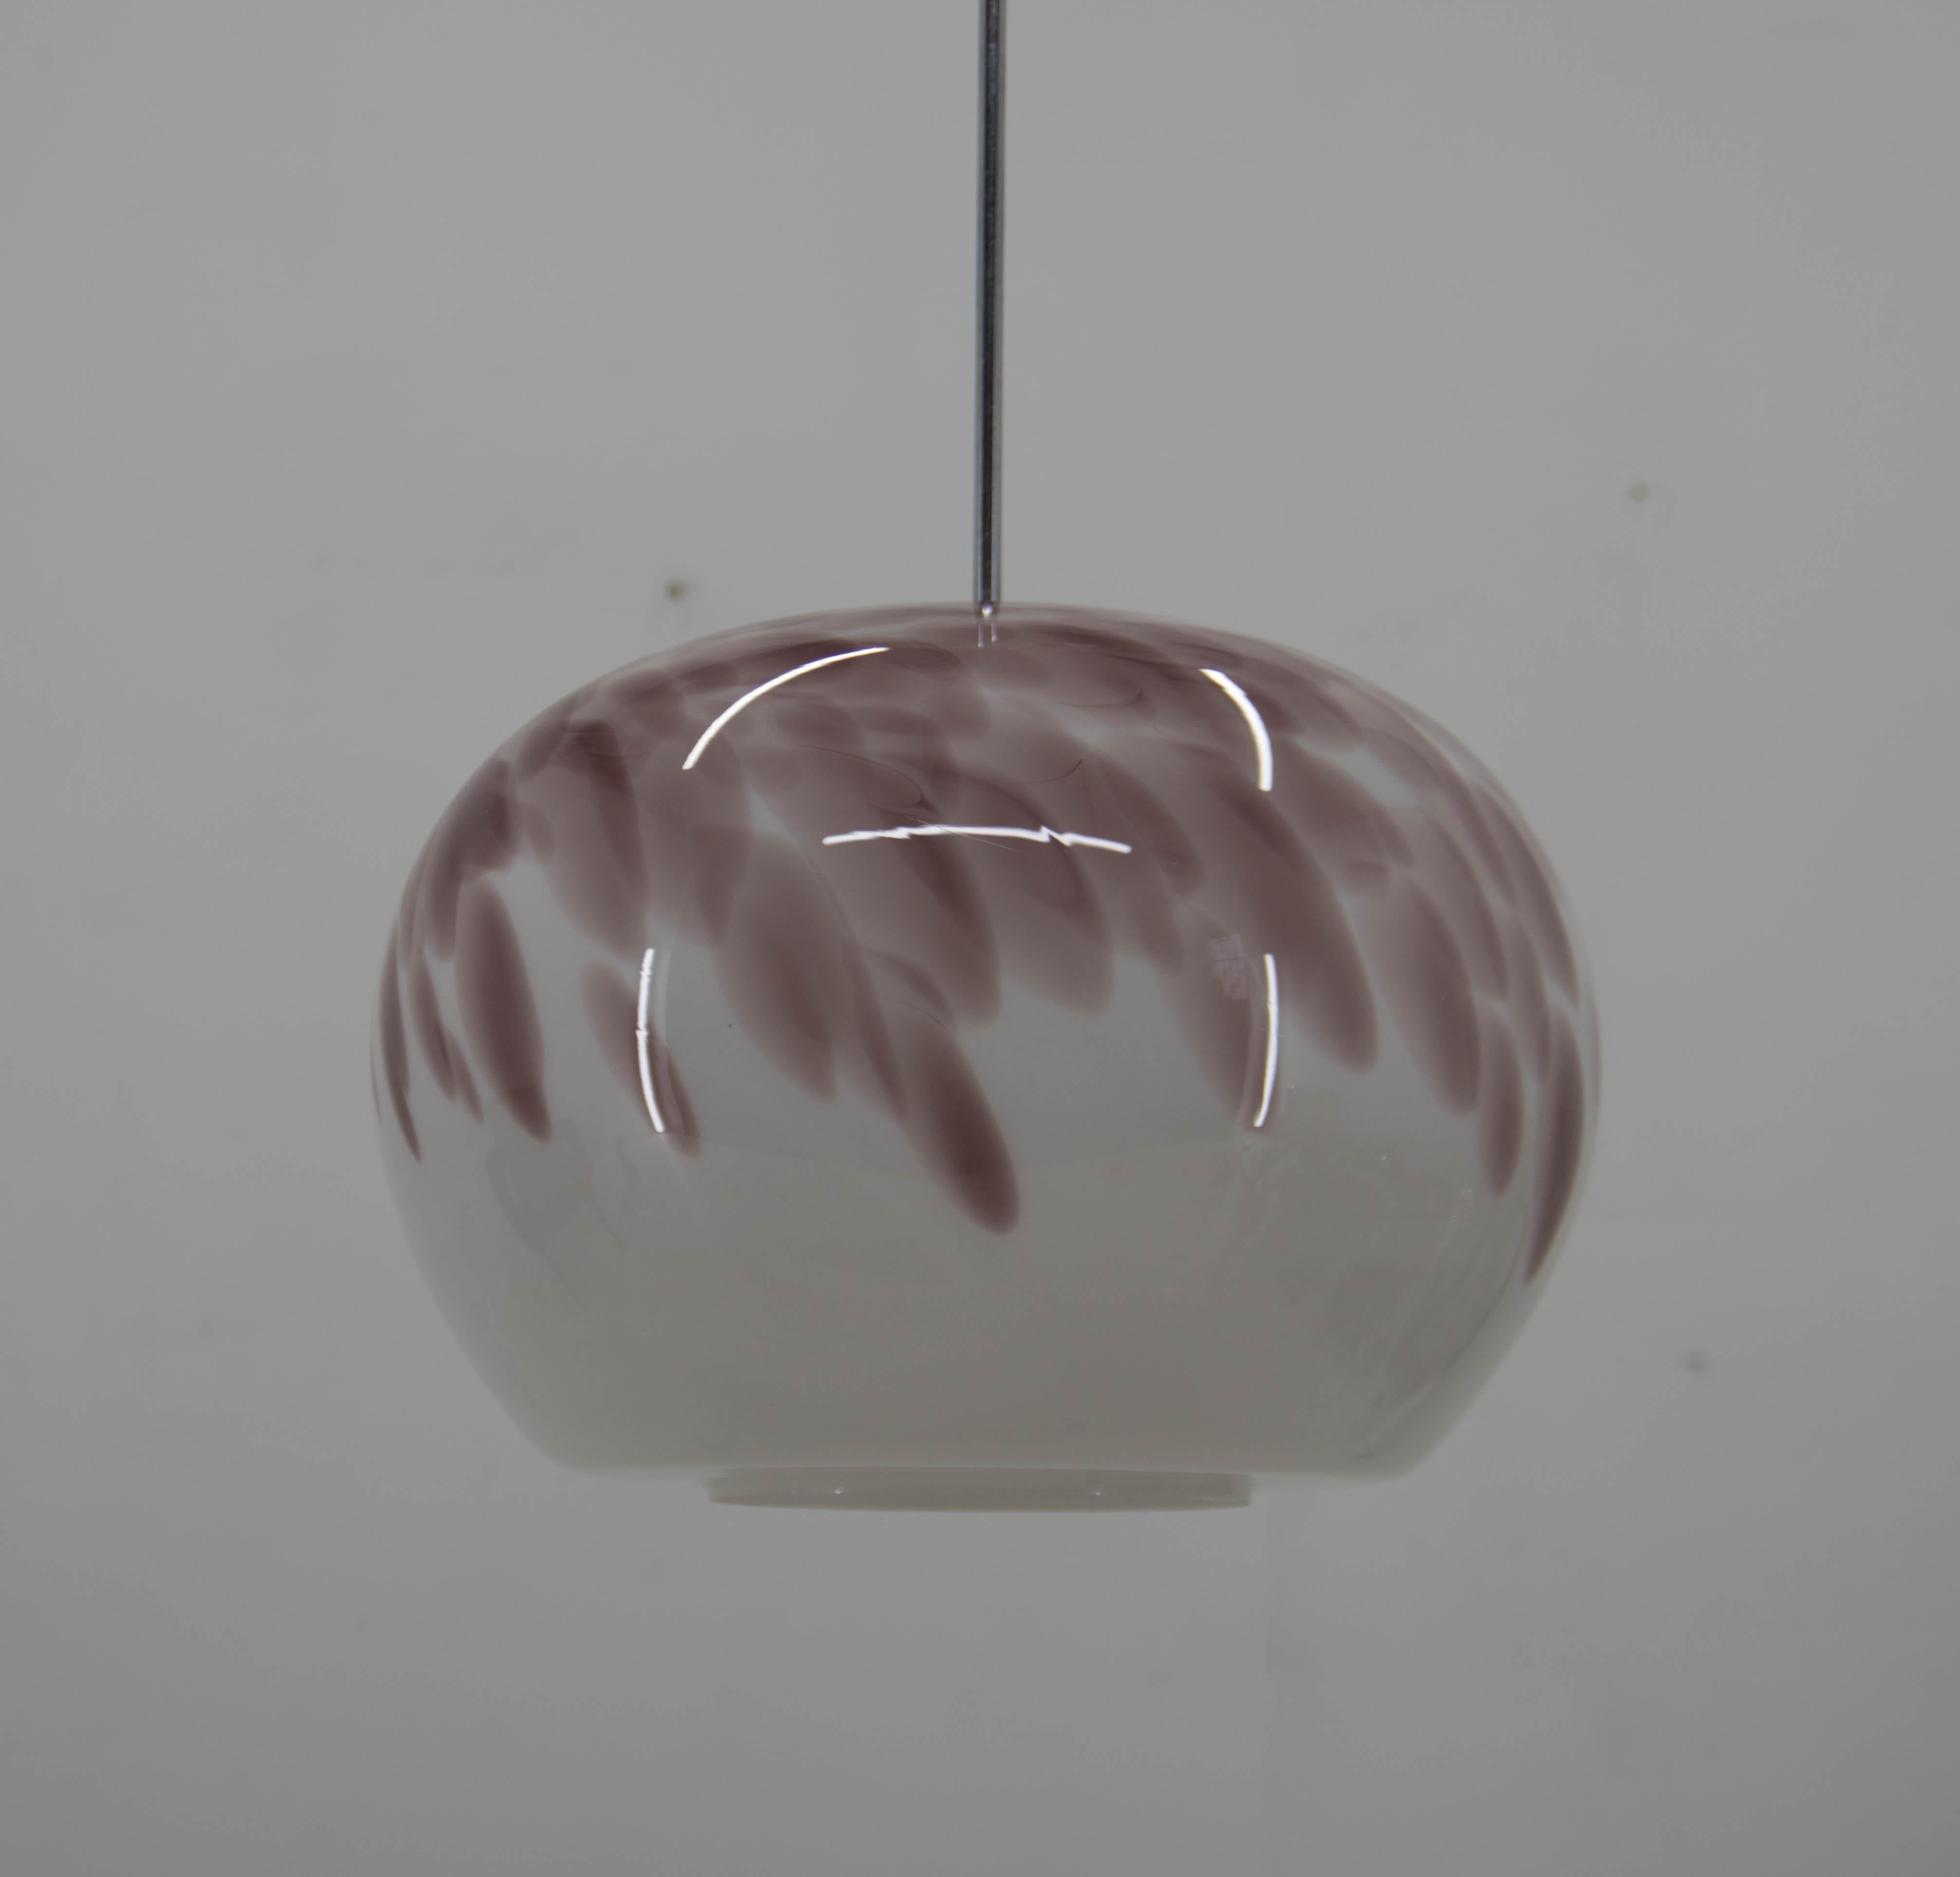 Beautiful blown glass pendant.
Max height 126 cm, can be shortened on request.
1x100W, E25-E27 bulb
US wiring compatible